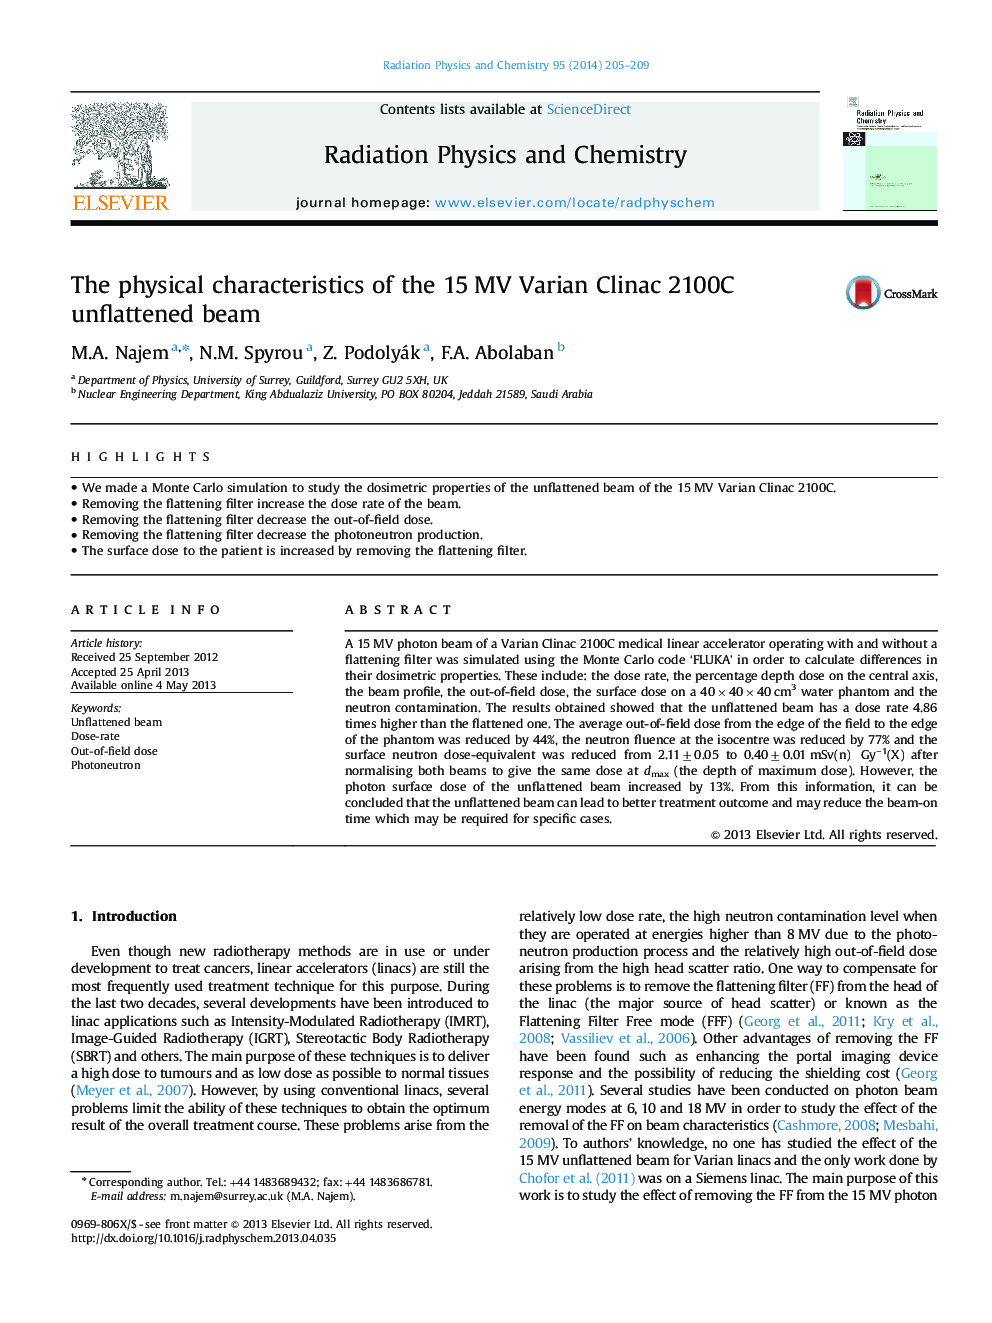 The physical characteristics of the 15 MV Varian Clinac 2100C unflattened beam